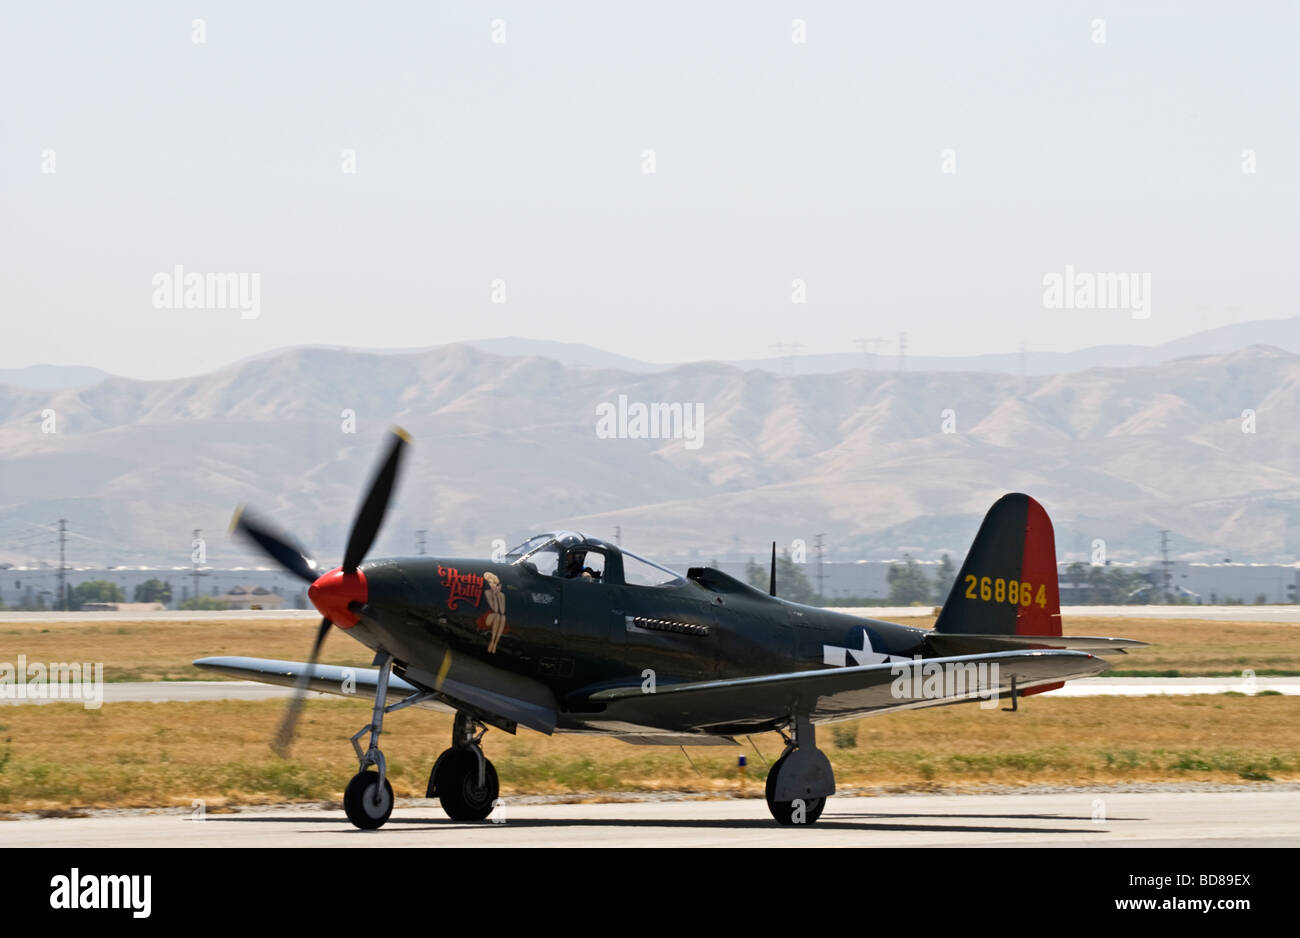 A P-63 Kingcobra taxis on the runway after flying at an air show. Stock Photo